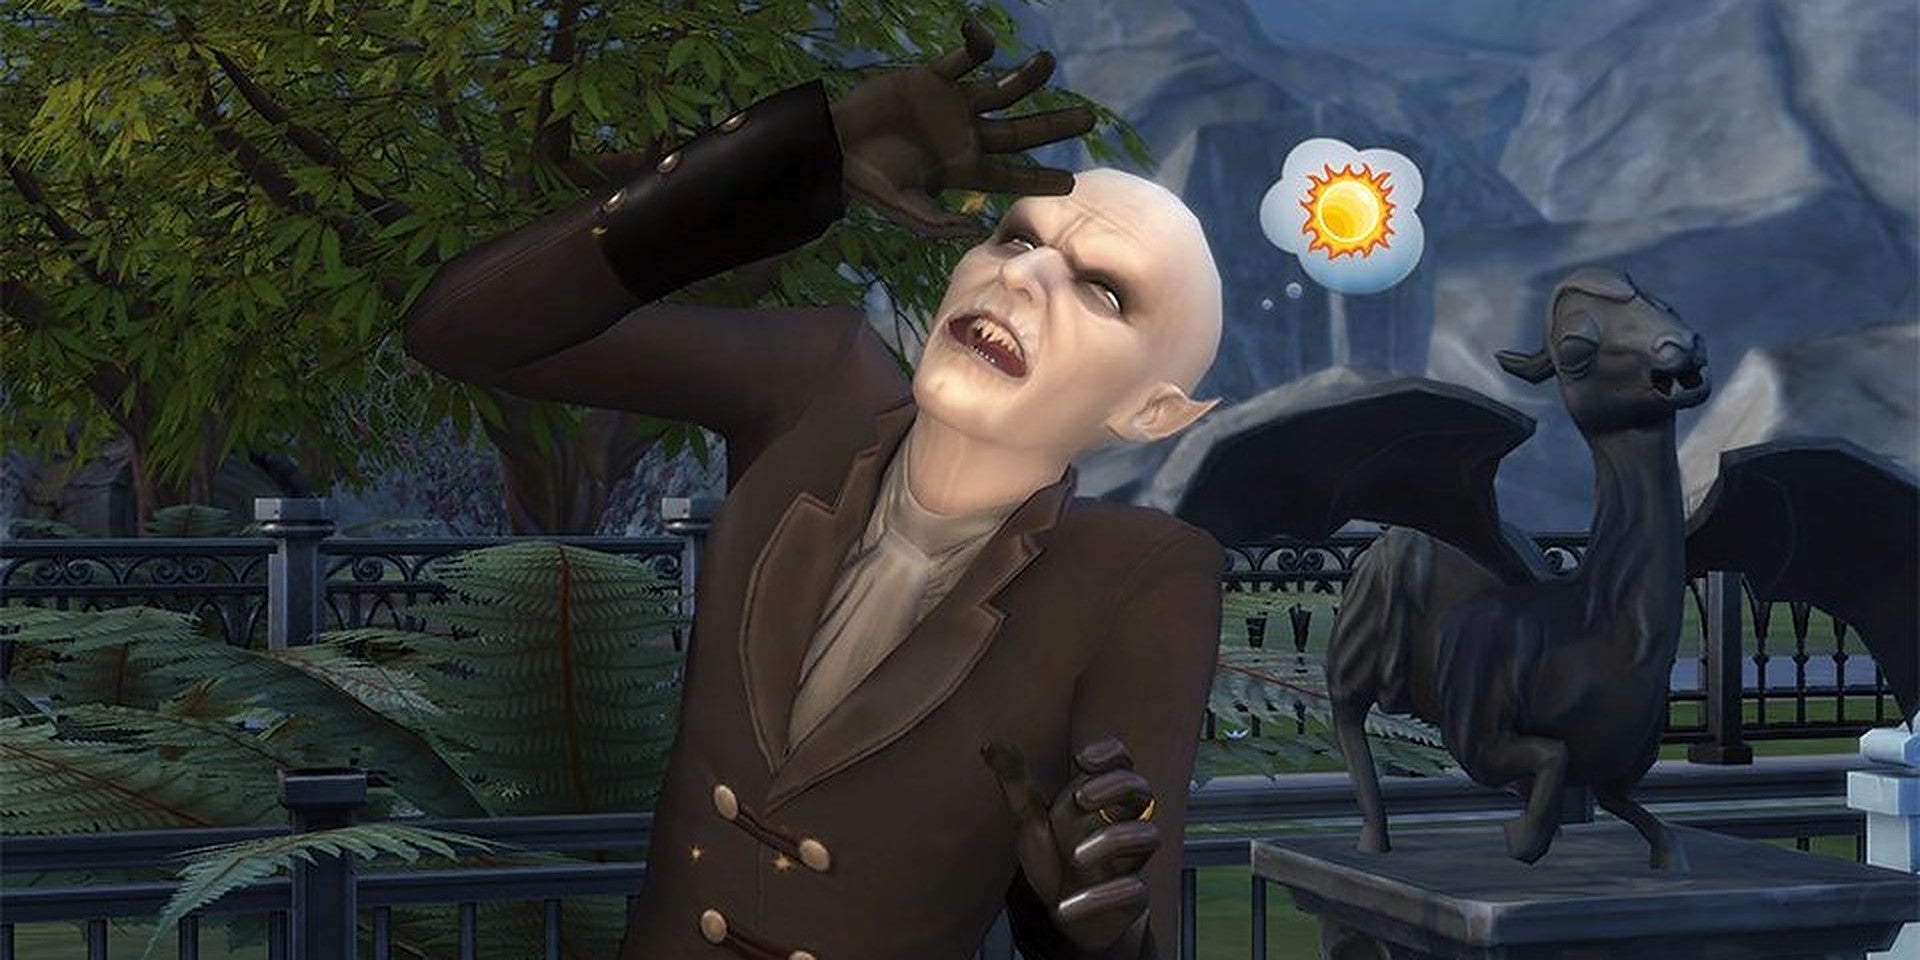 Vlad reacts negatively to Sun in The Sims 4.